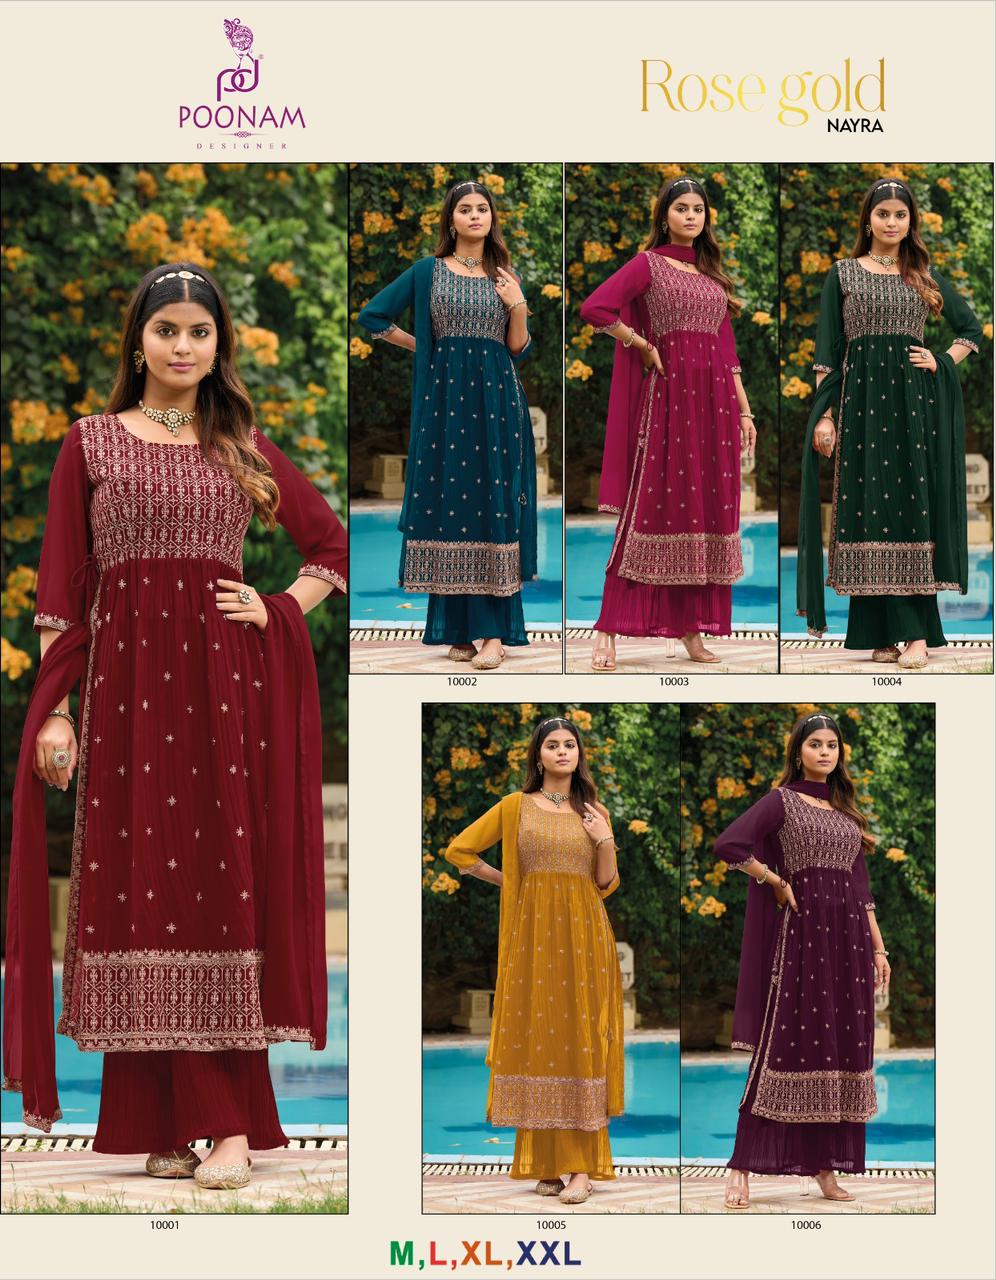 Poonam Rose Gold collection 4